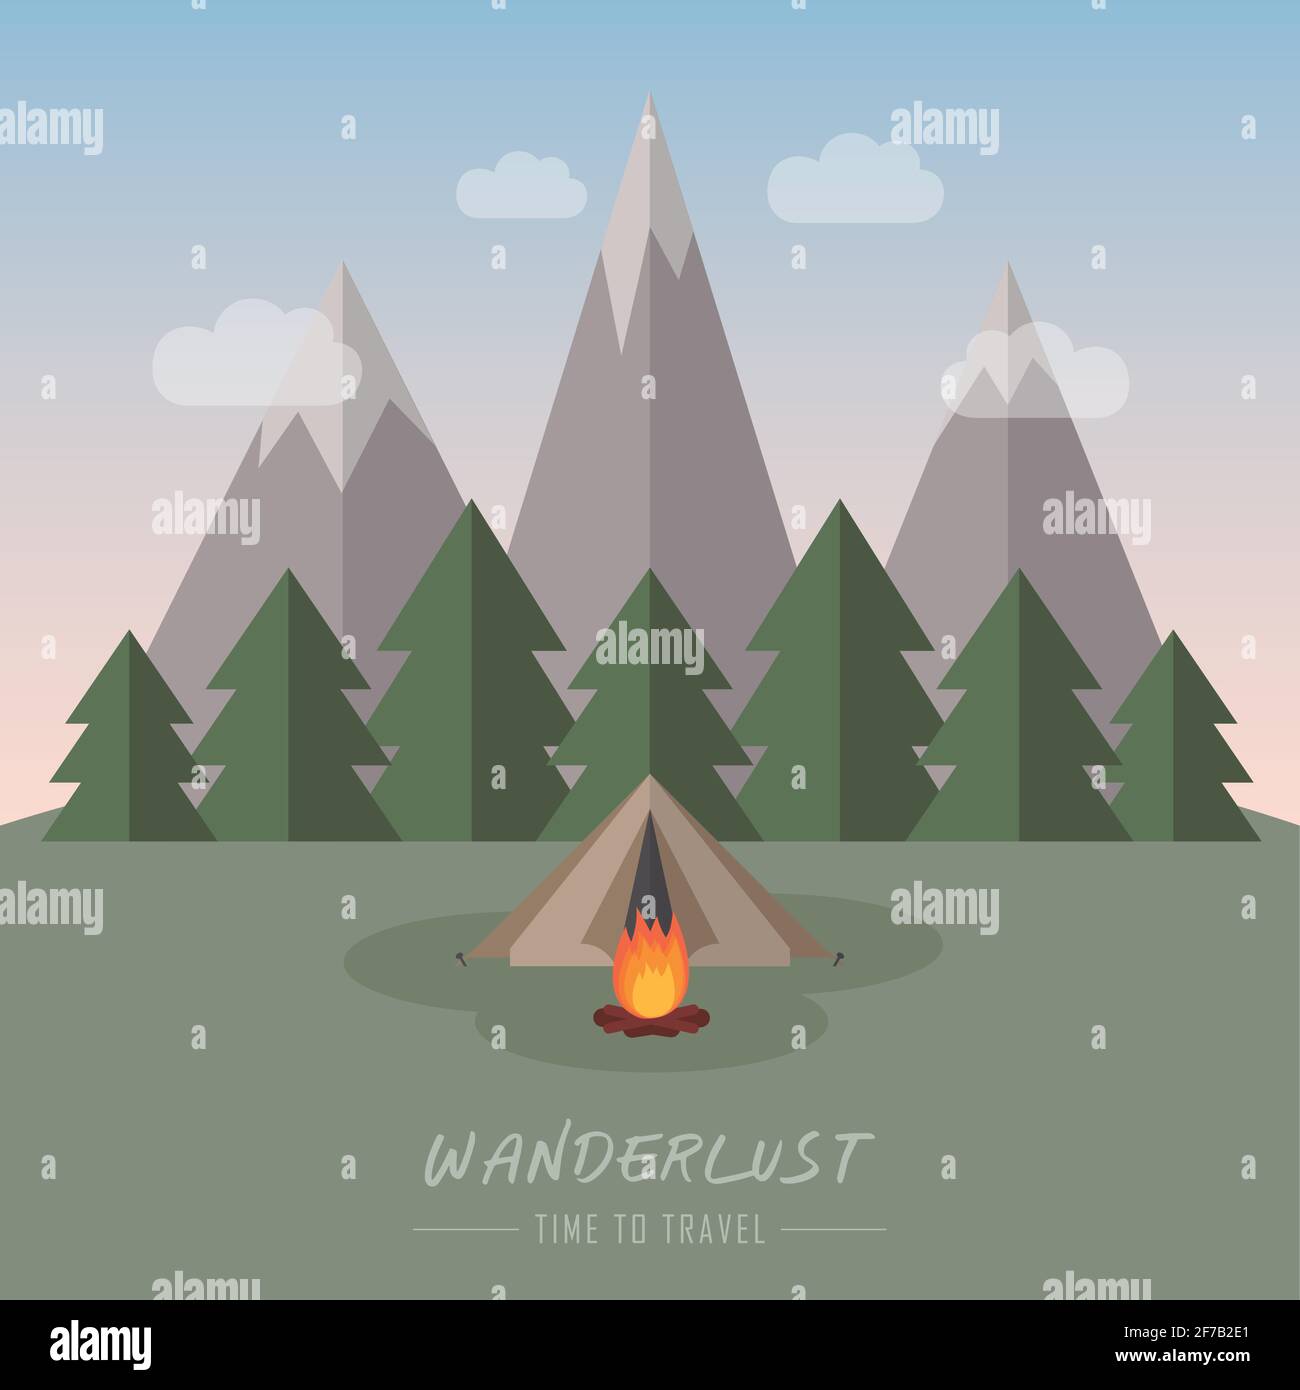 wanderlust camping adventure in the wilderness tent in snowy mountain Stock Vector